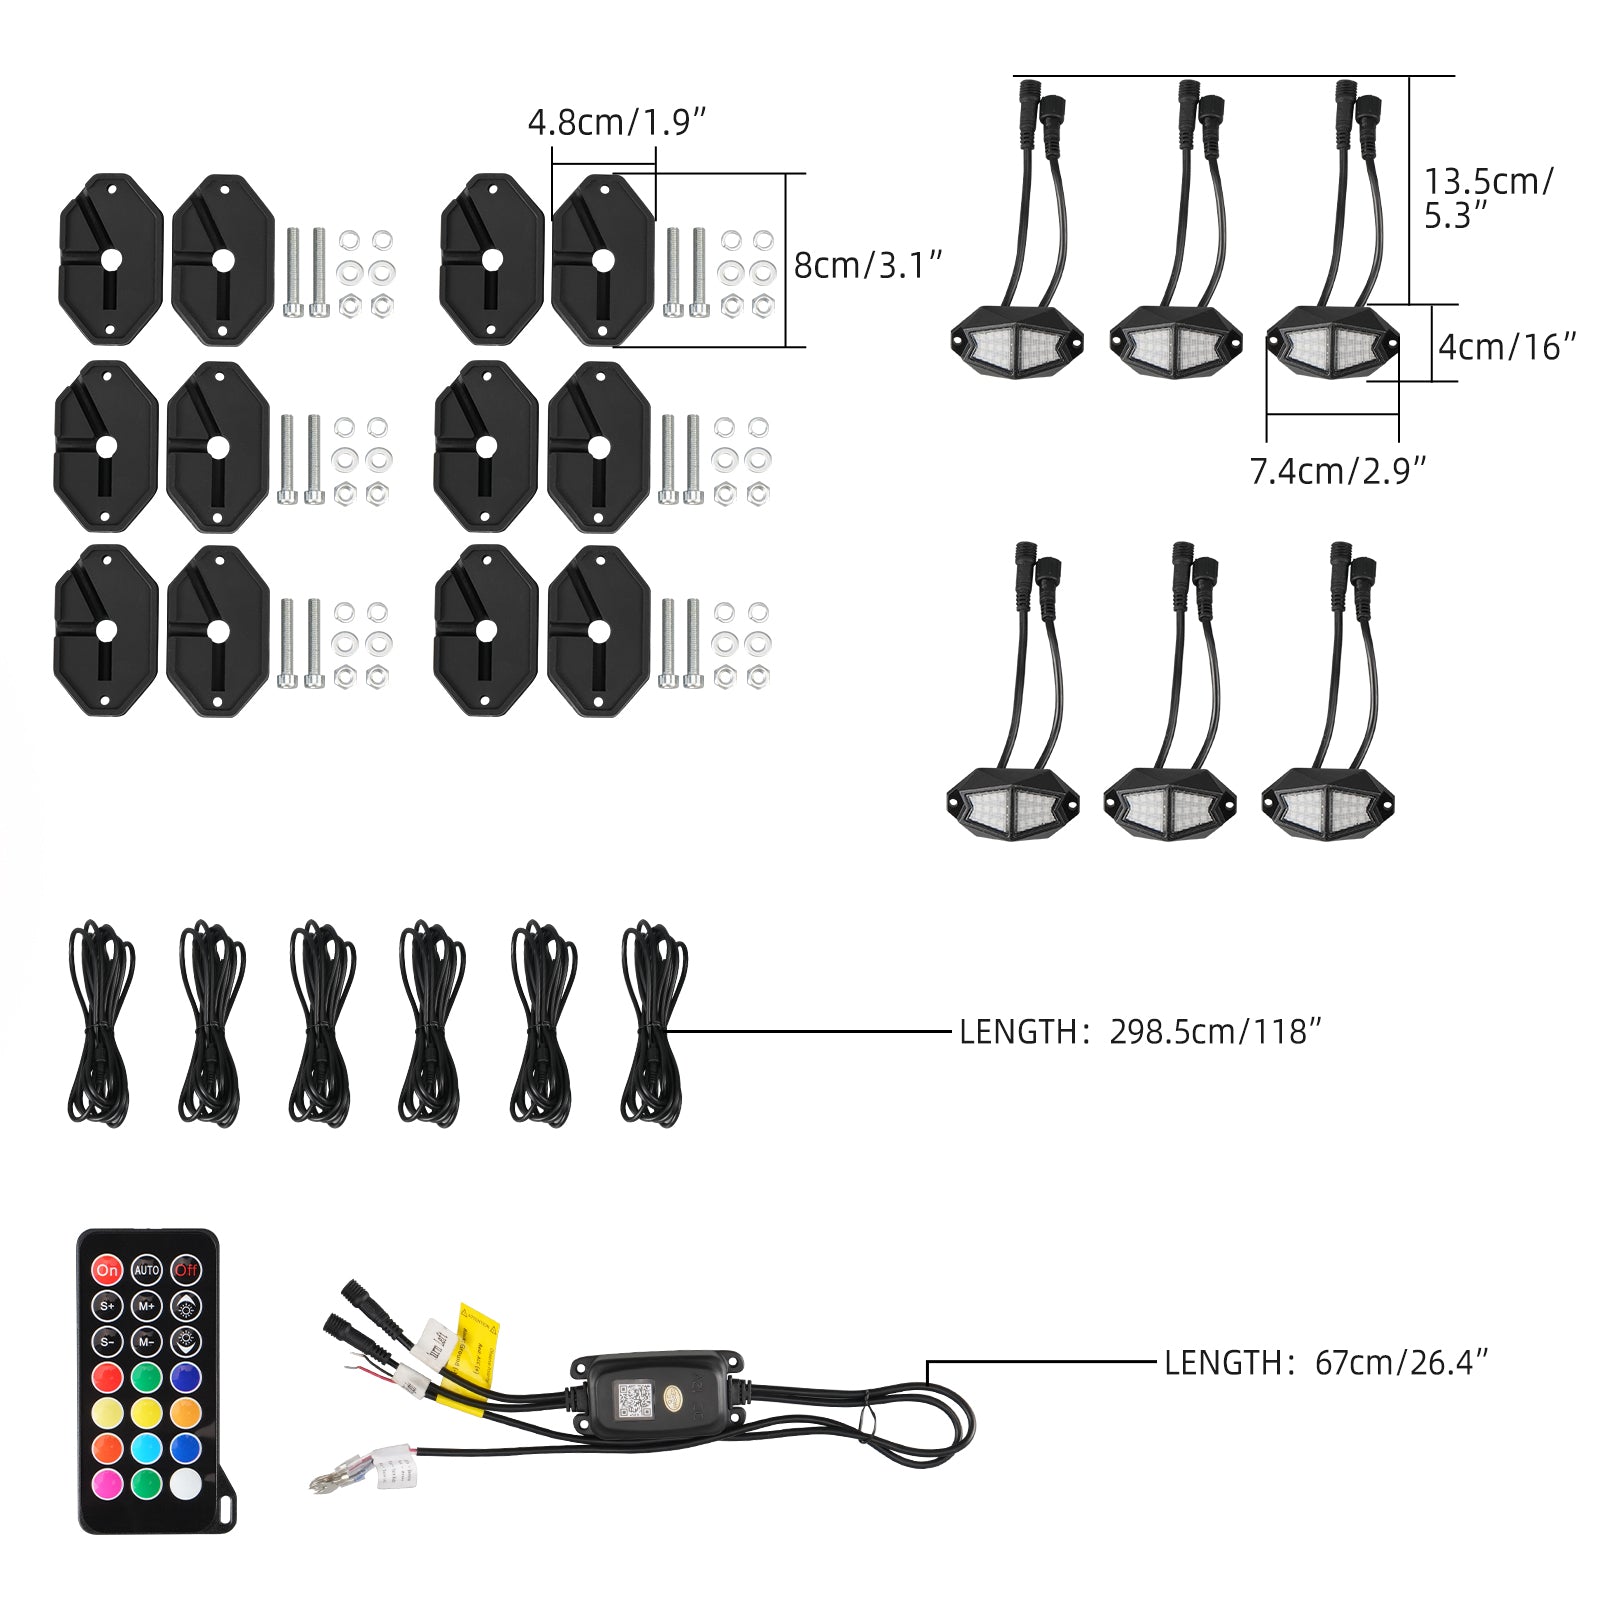 BEVINSEE 6/8 Pods Wide Angle RGB LED Rock Lights APP/Remote Control Neon LED Under Car Chase Lighting Kits for Off-Road UTV ATV Touring